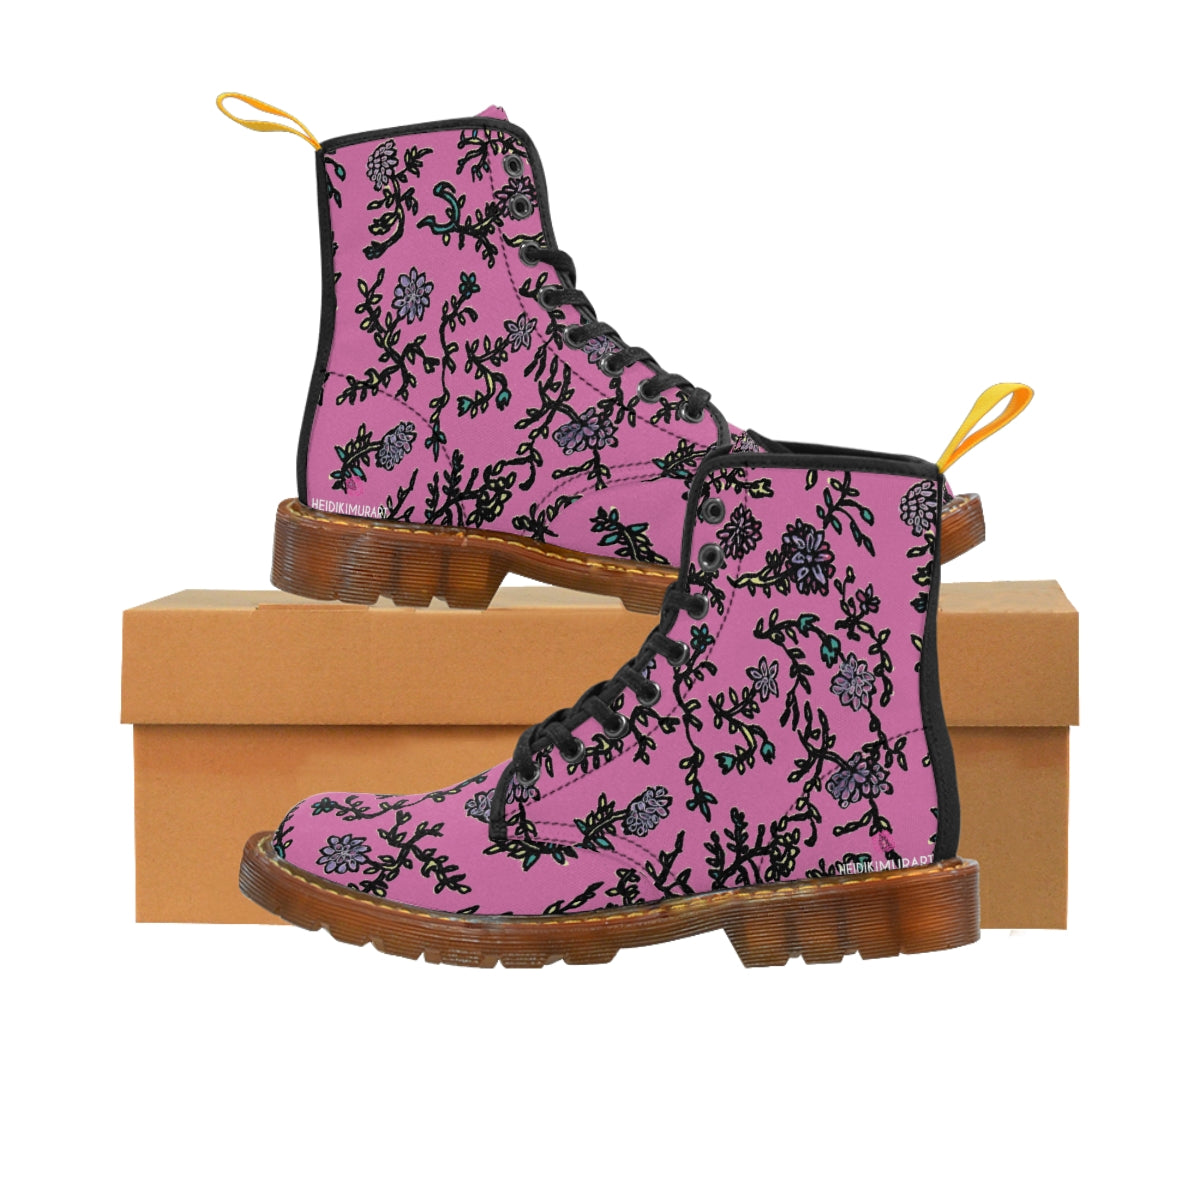 Pink Floral Print Women's Boots, Purple Floral Women's Boots, Flower Print Elegant Feminine Casual Fashion Gifts, Flower Rose Print Shoes For Flower Lovers, Combat Boots, Designer Women's Winter Lace-up Toe Cap Hiking Boots Shoes For Women (US Size 6.5-11) Black Floral Boots, Floral Boots Womens, Vintage Style Floral Boots 